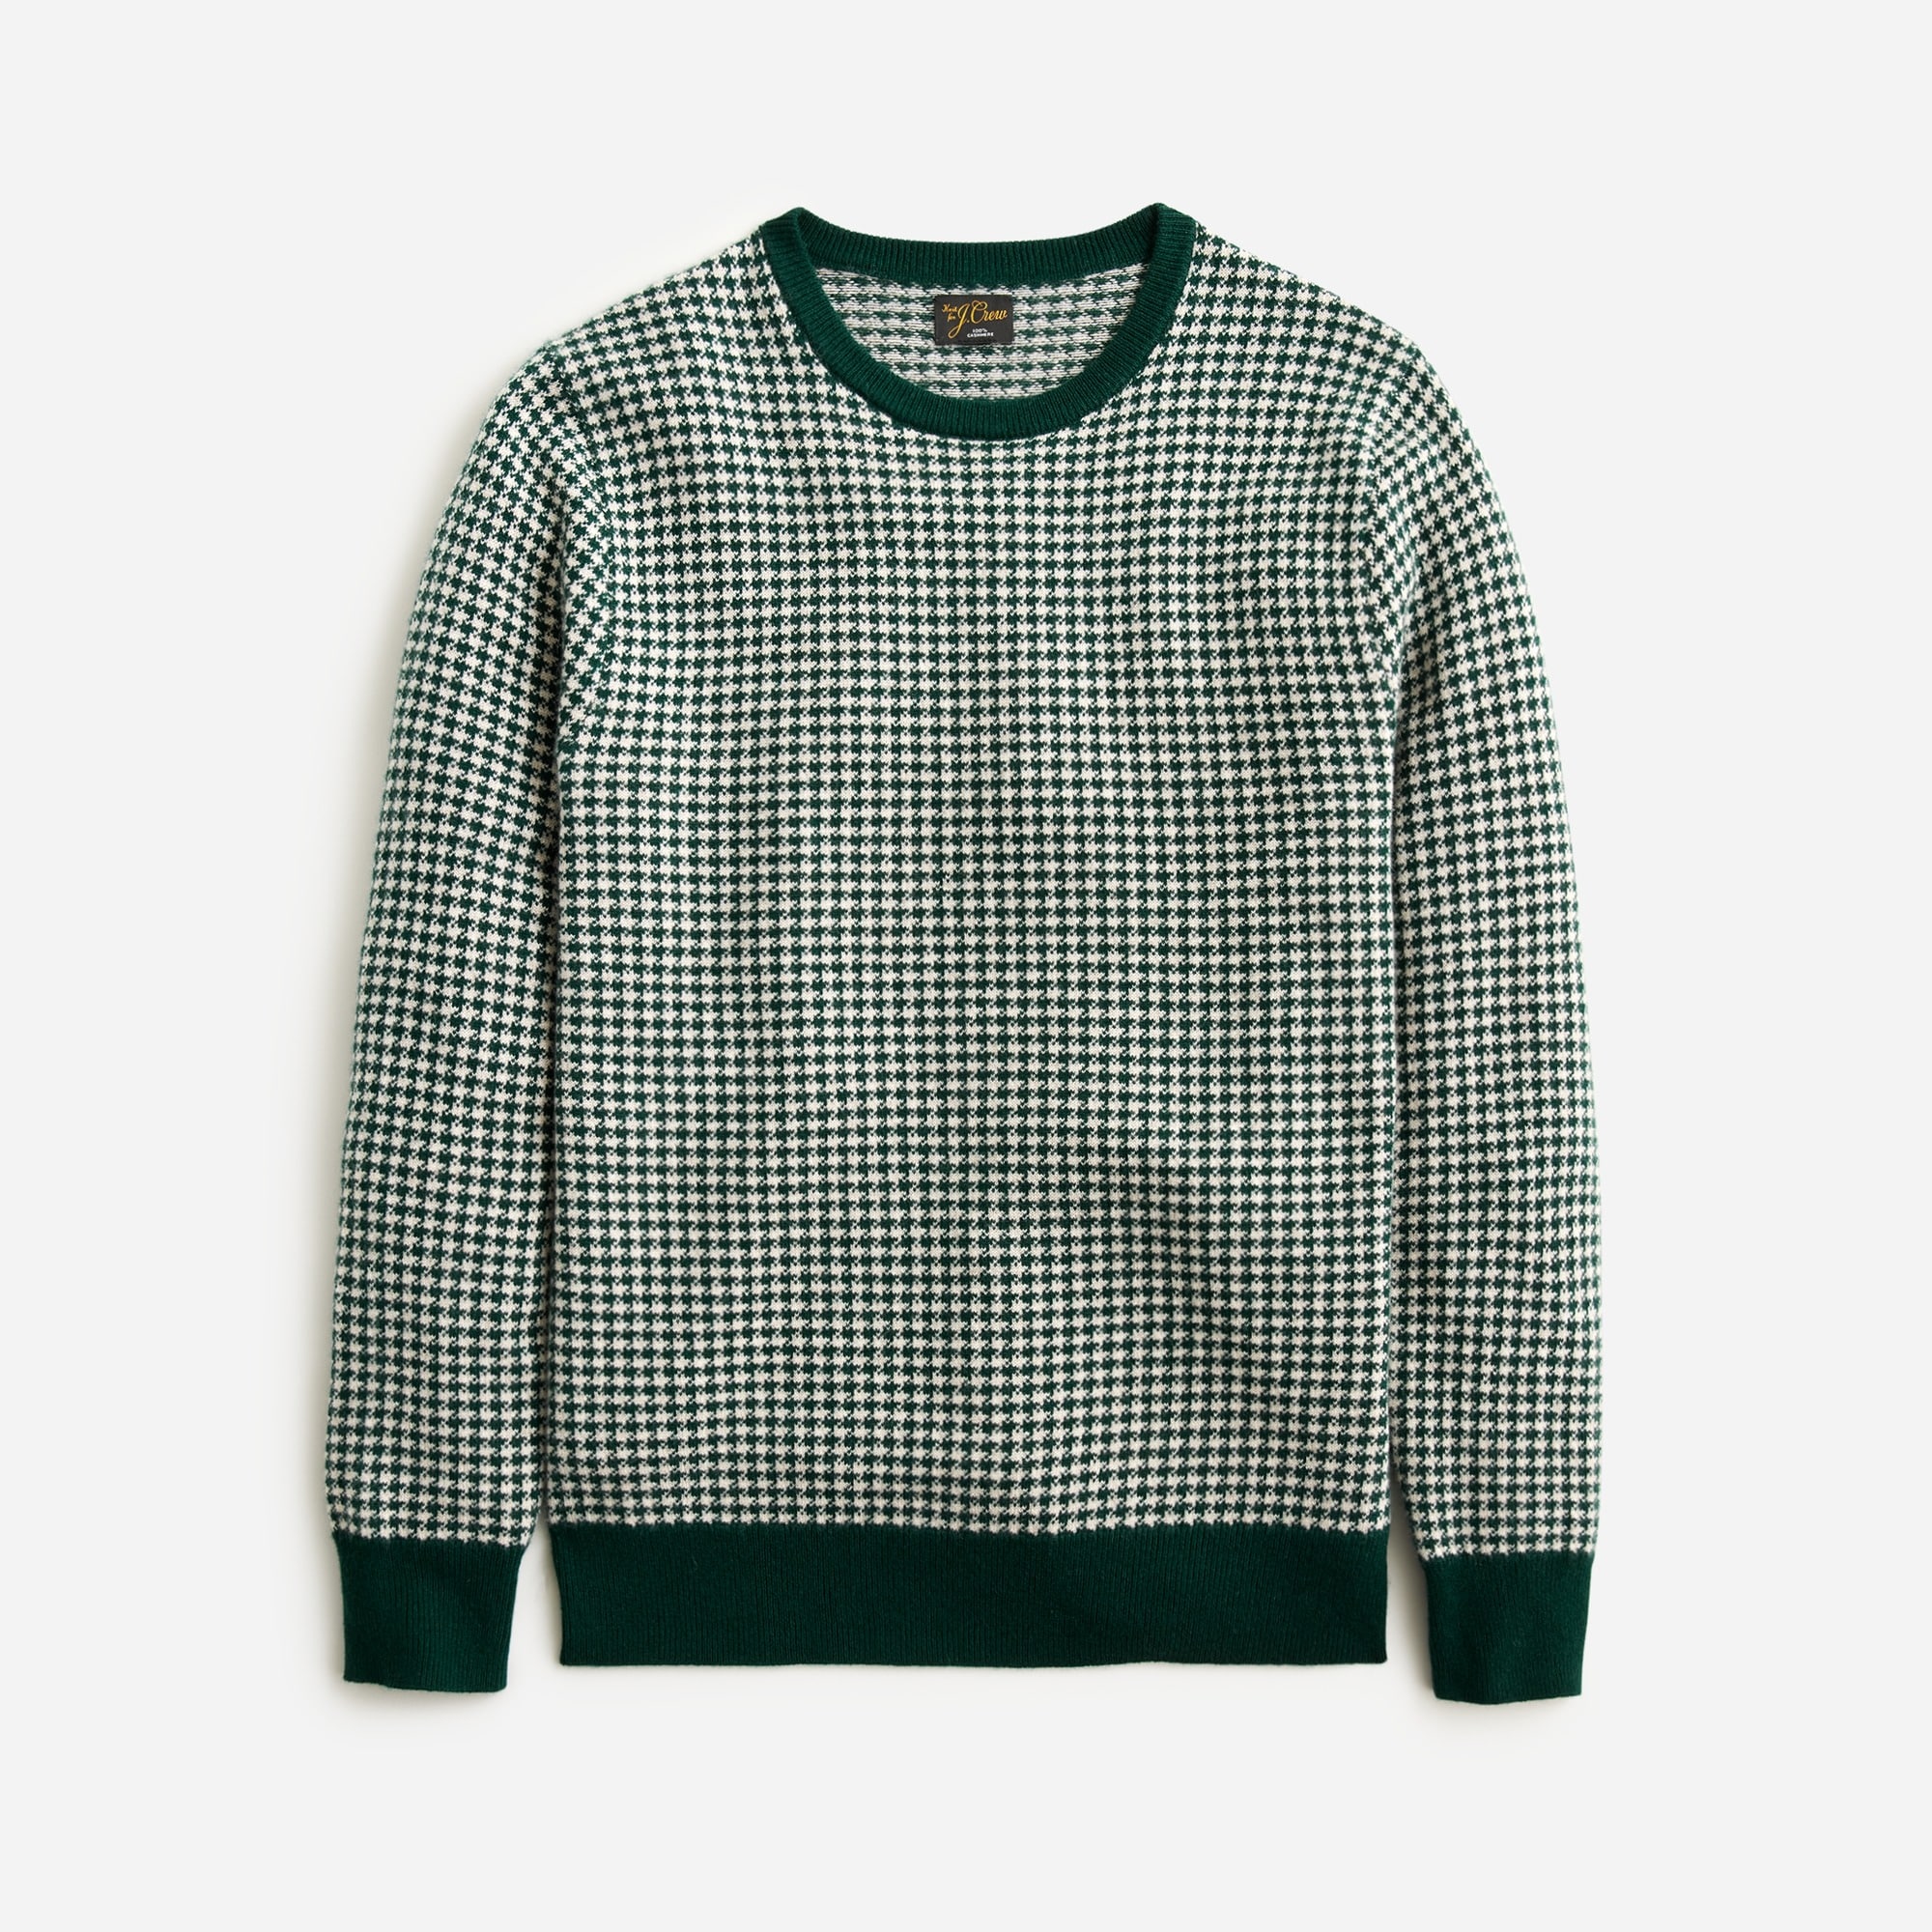  Cashmere crewneck sweater in houndstooth